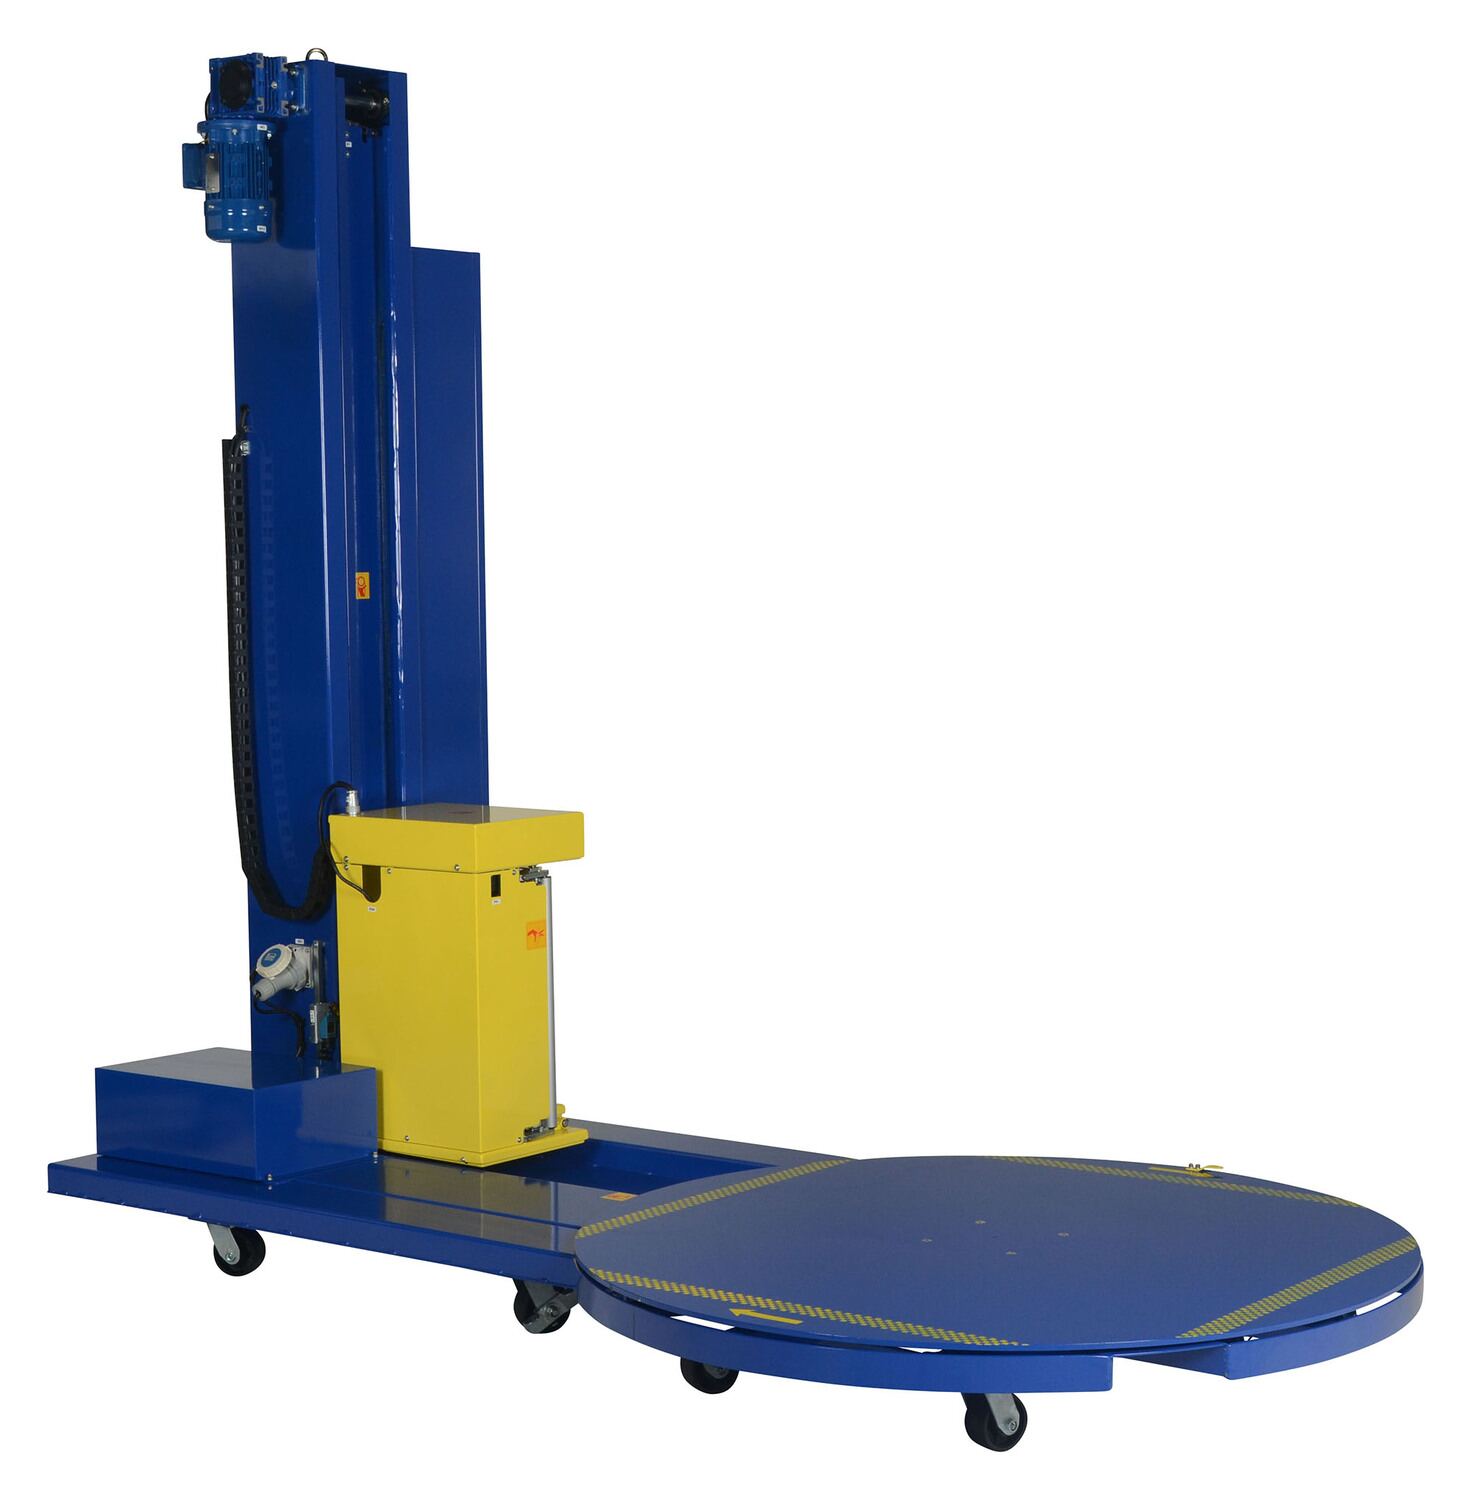 Comparative: Stretch Wrapping Vs Strapping Systems for pallet securing